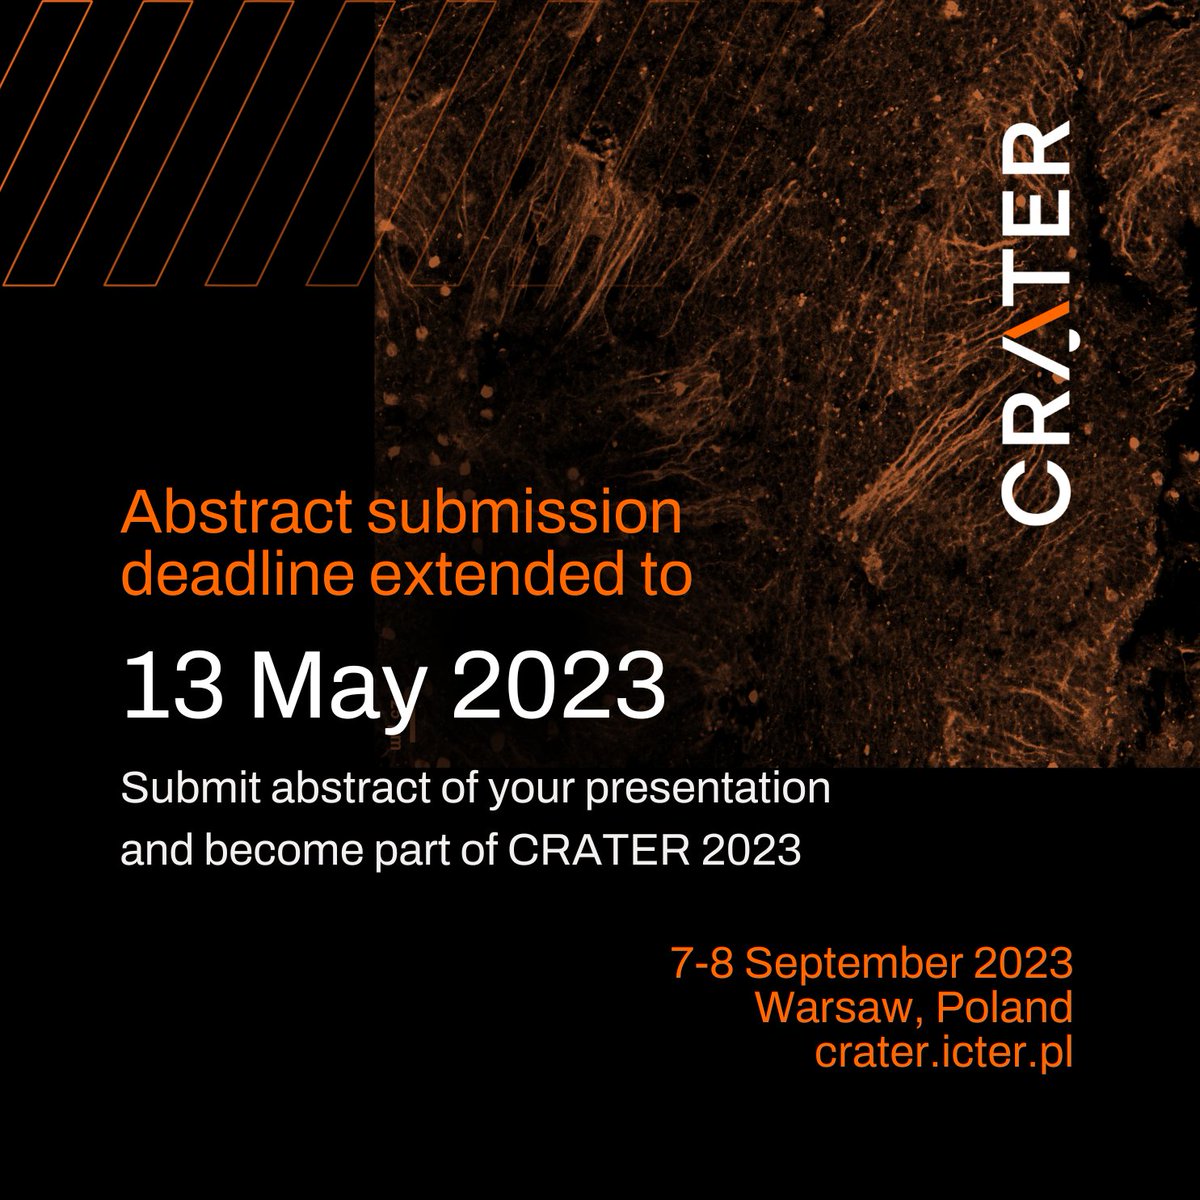 📢📢 Exciting news!📢 The deadline for abstract submissions for our upcoming #CRATER2023 conference has been extended! 🚀 #CRATERconference #abstractsubmission #extendeddeadline #research #eye #translational #research  🚀🔬📝 @ICTER_PL @ICHF_PAN @polonium_org @PAN_akademia